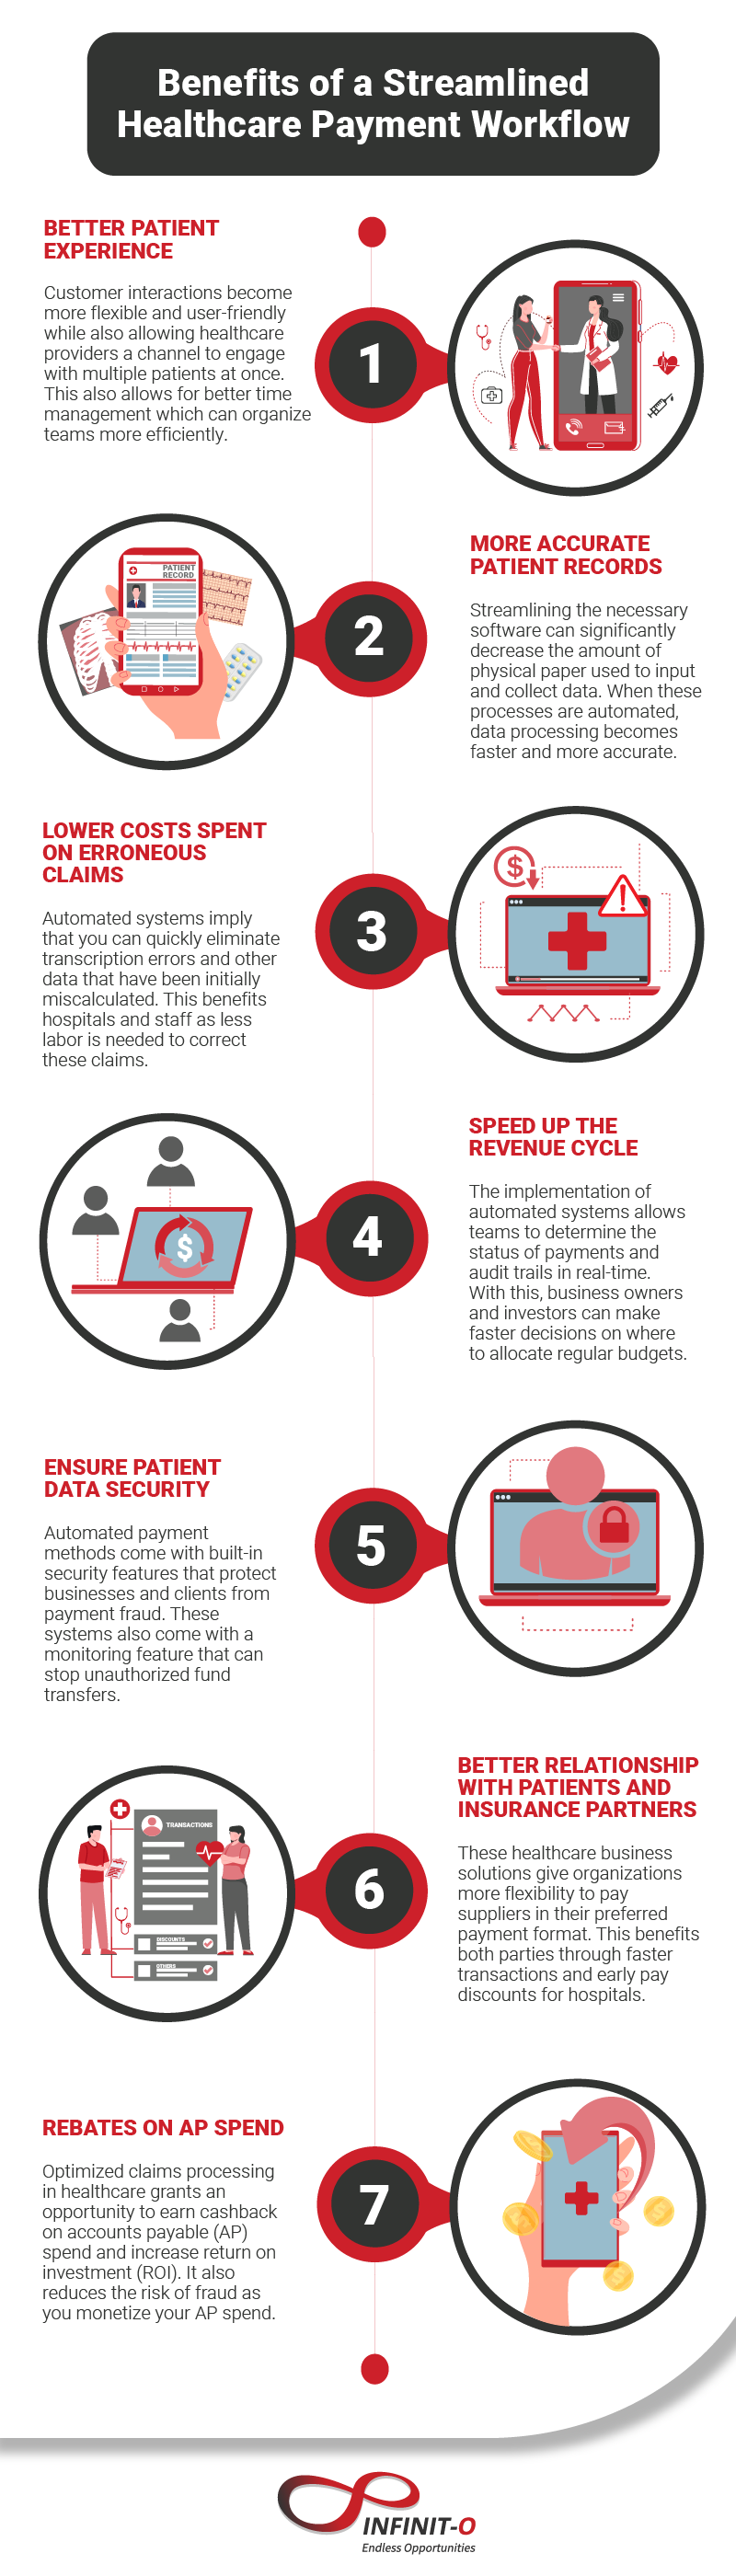 Benefits of a Streamlined Healthcare Payment Workflow